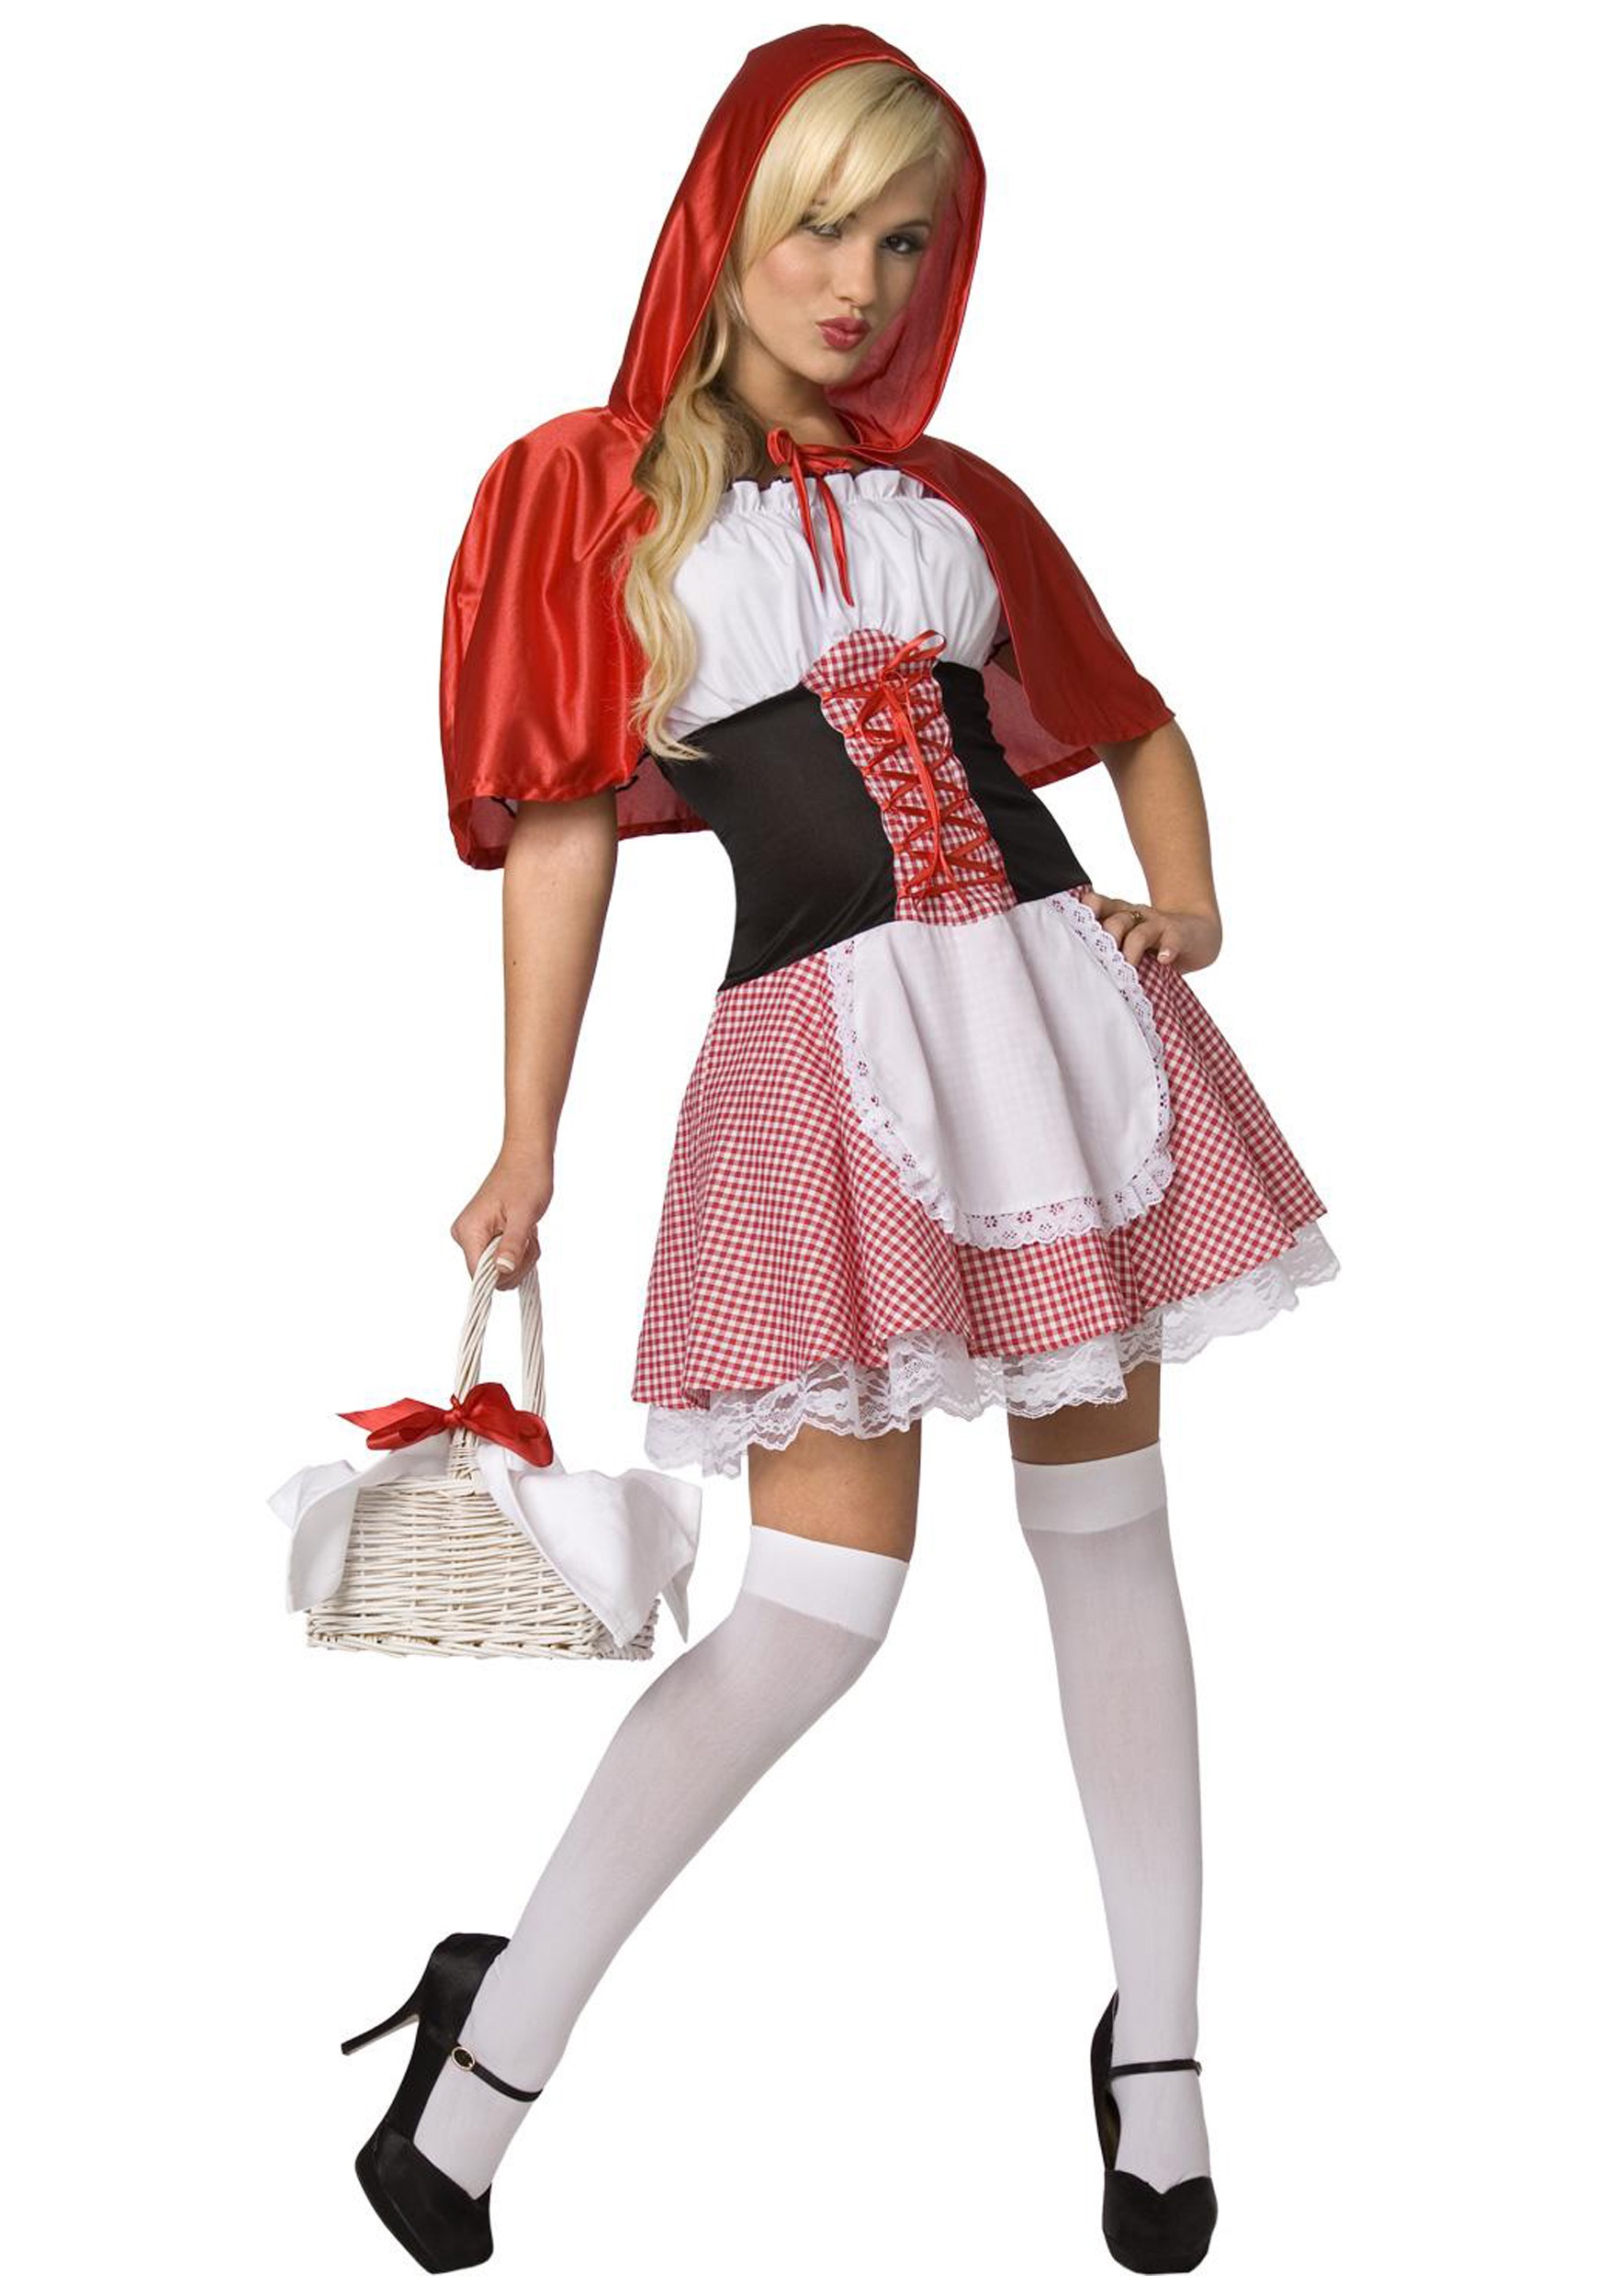 Sexy Red Riding Hood Costume For Women Storybook Character Costume 8135